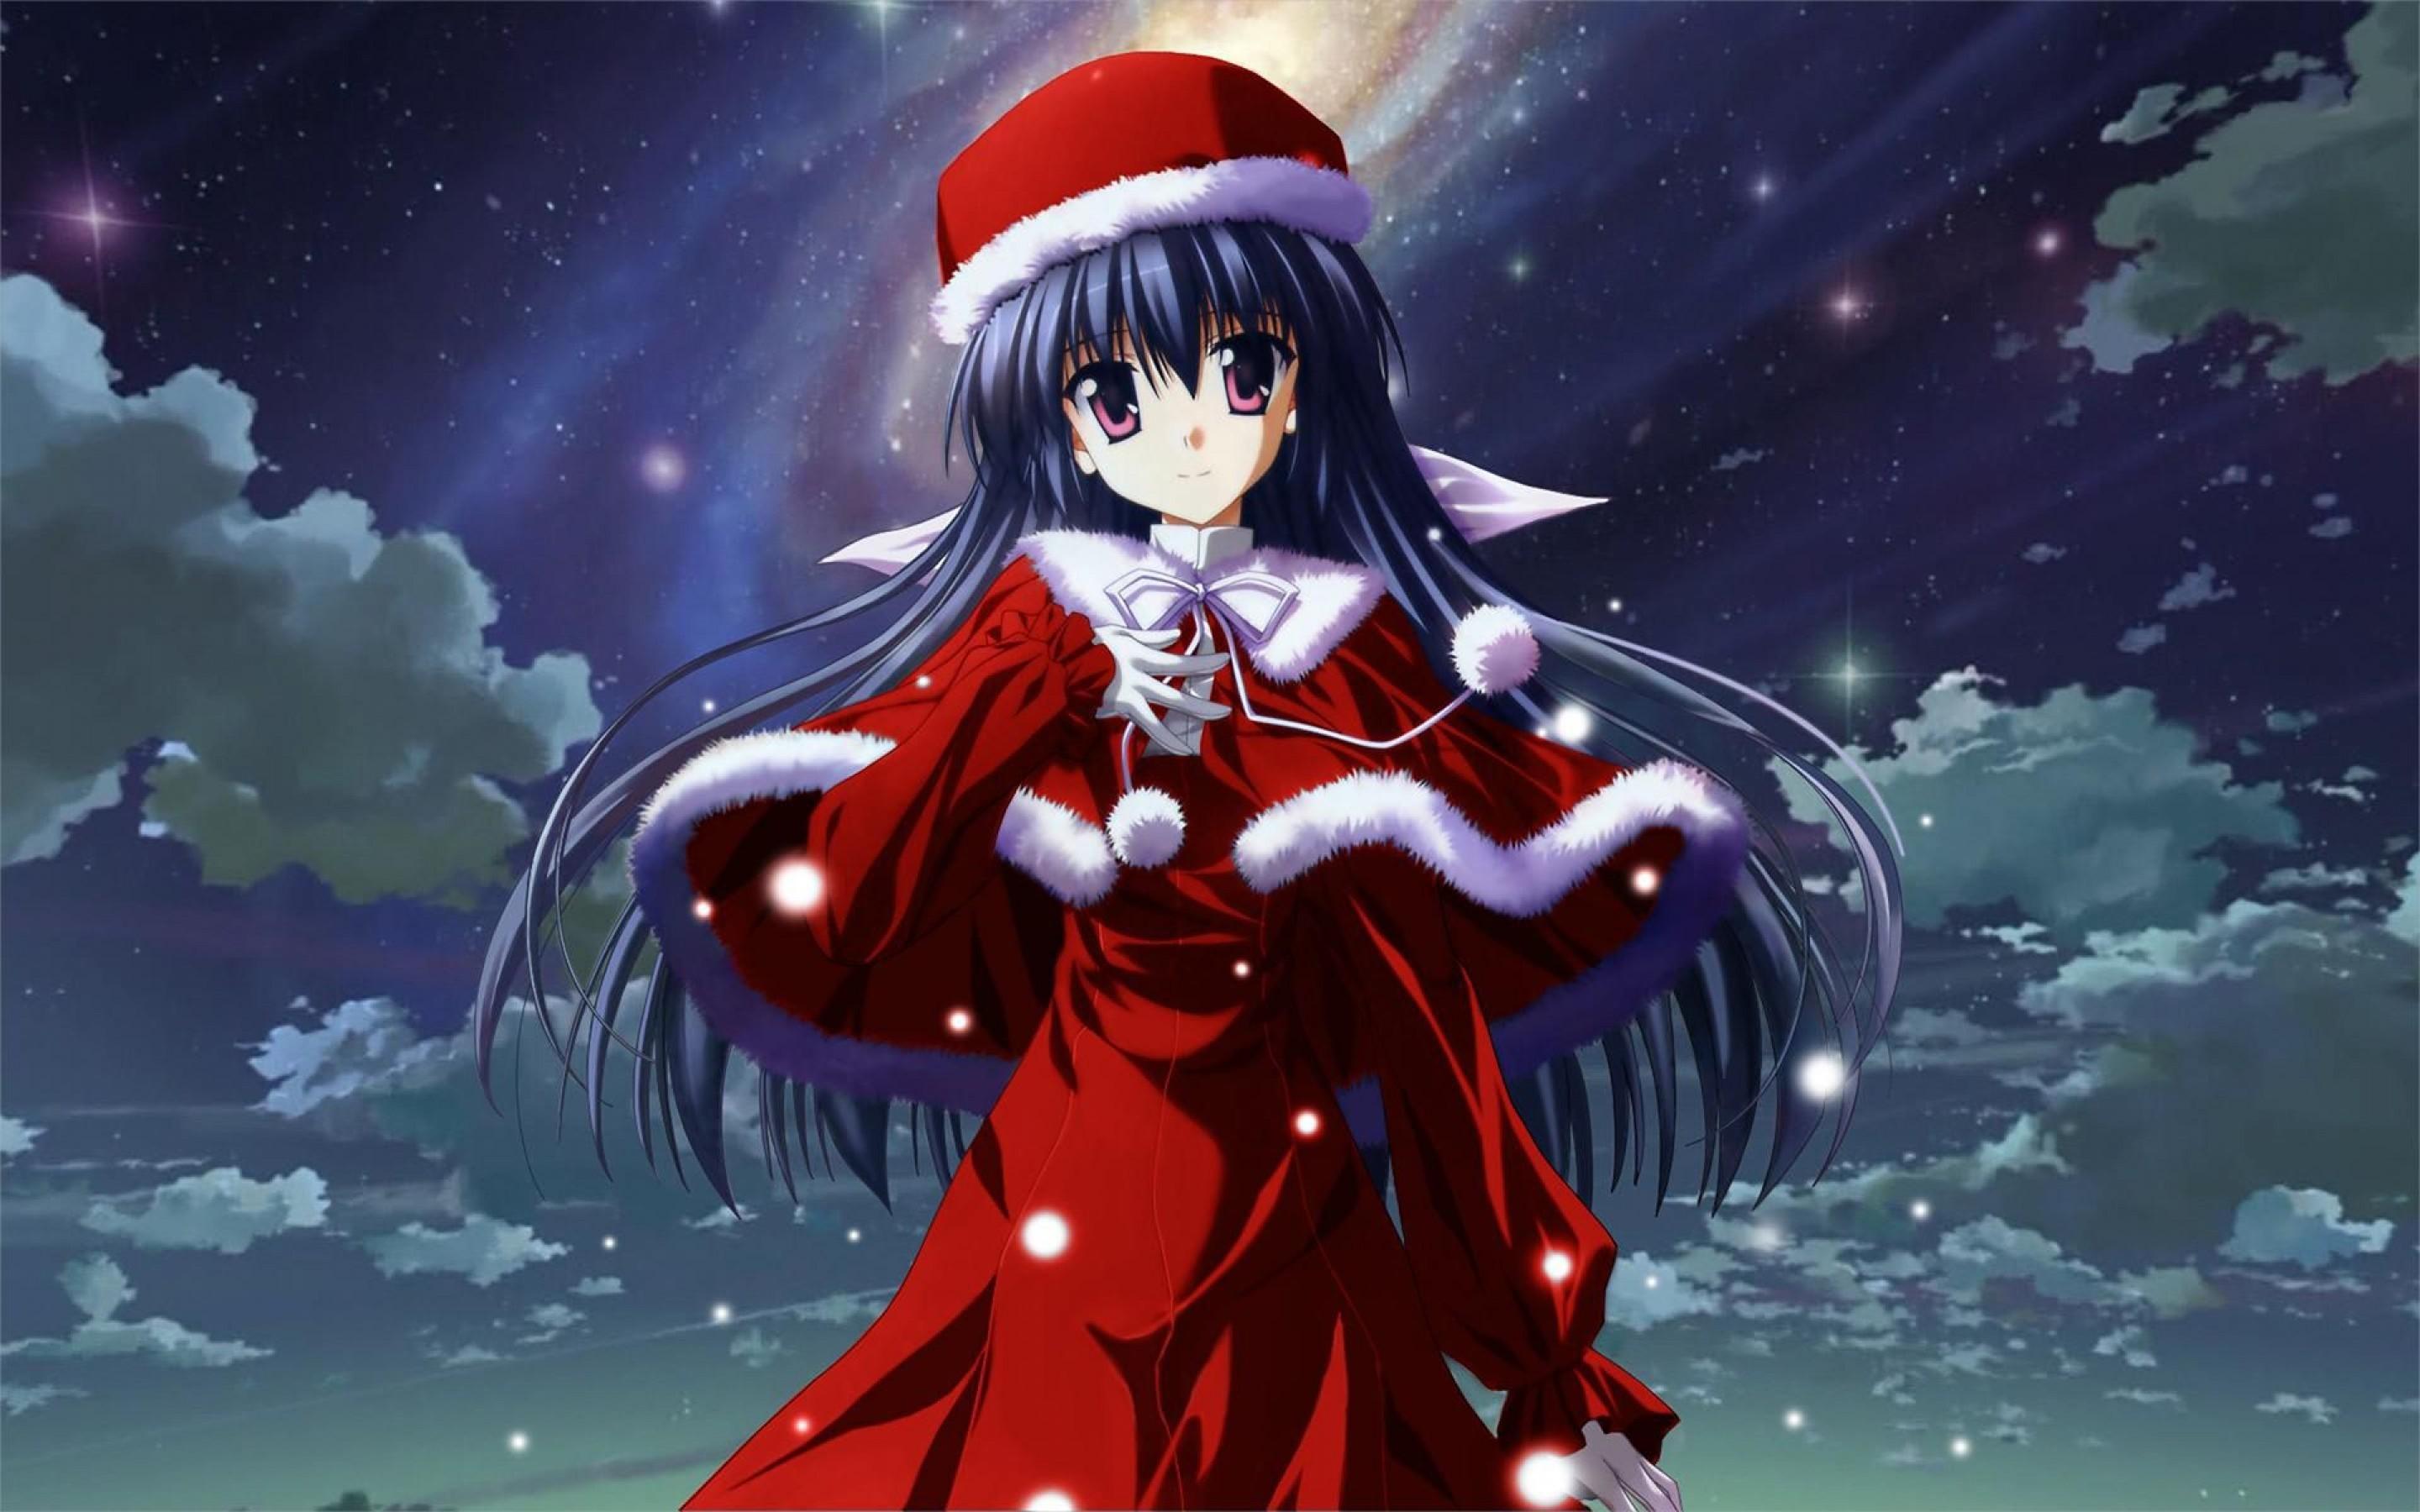 Red Cute Anime Girl Christmas Wallpaper Background Image